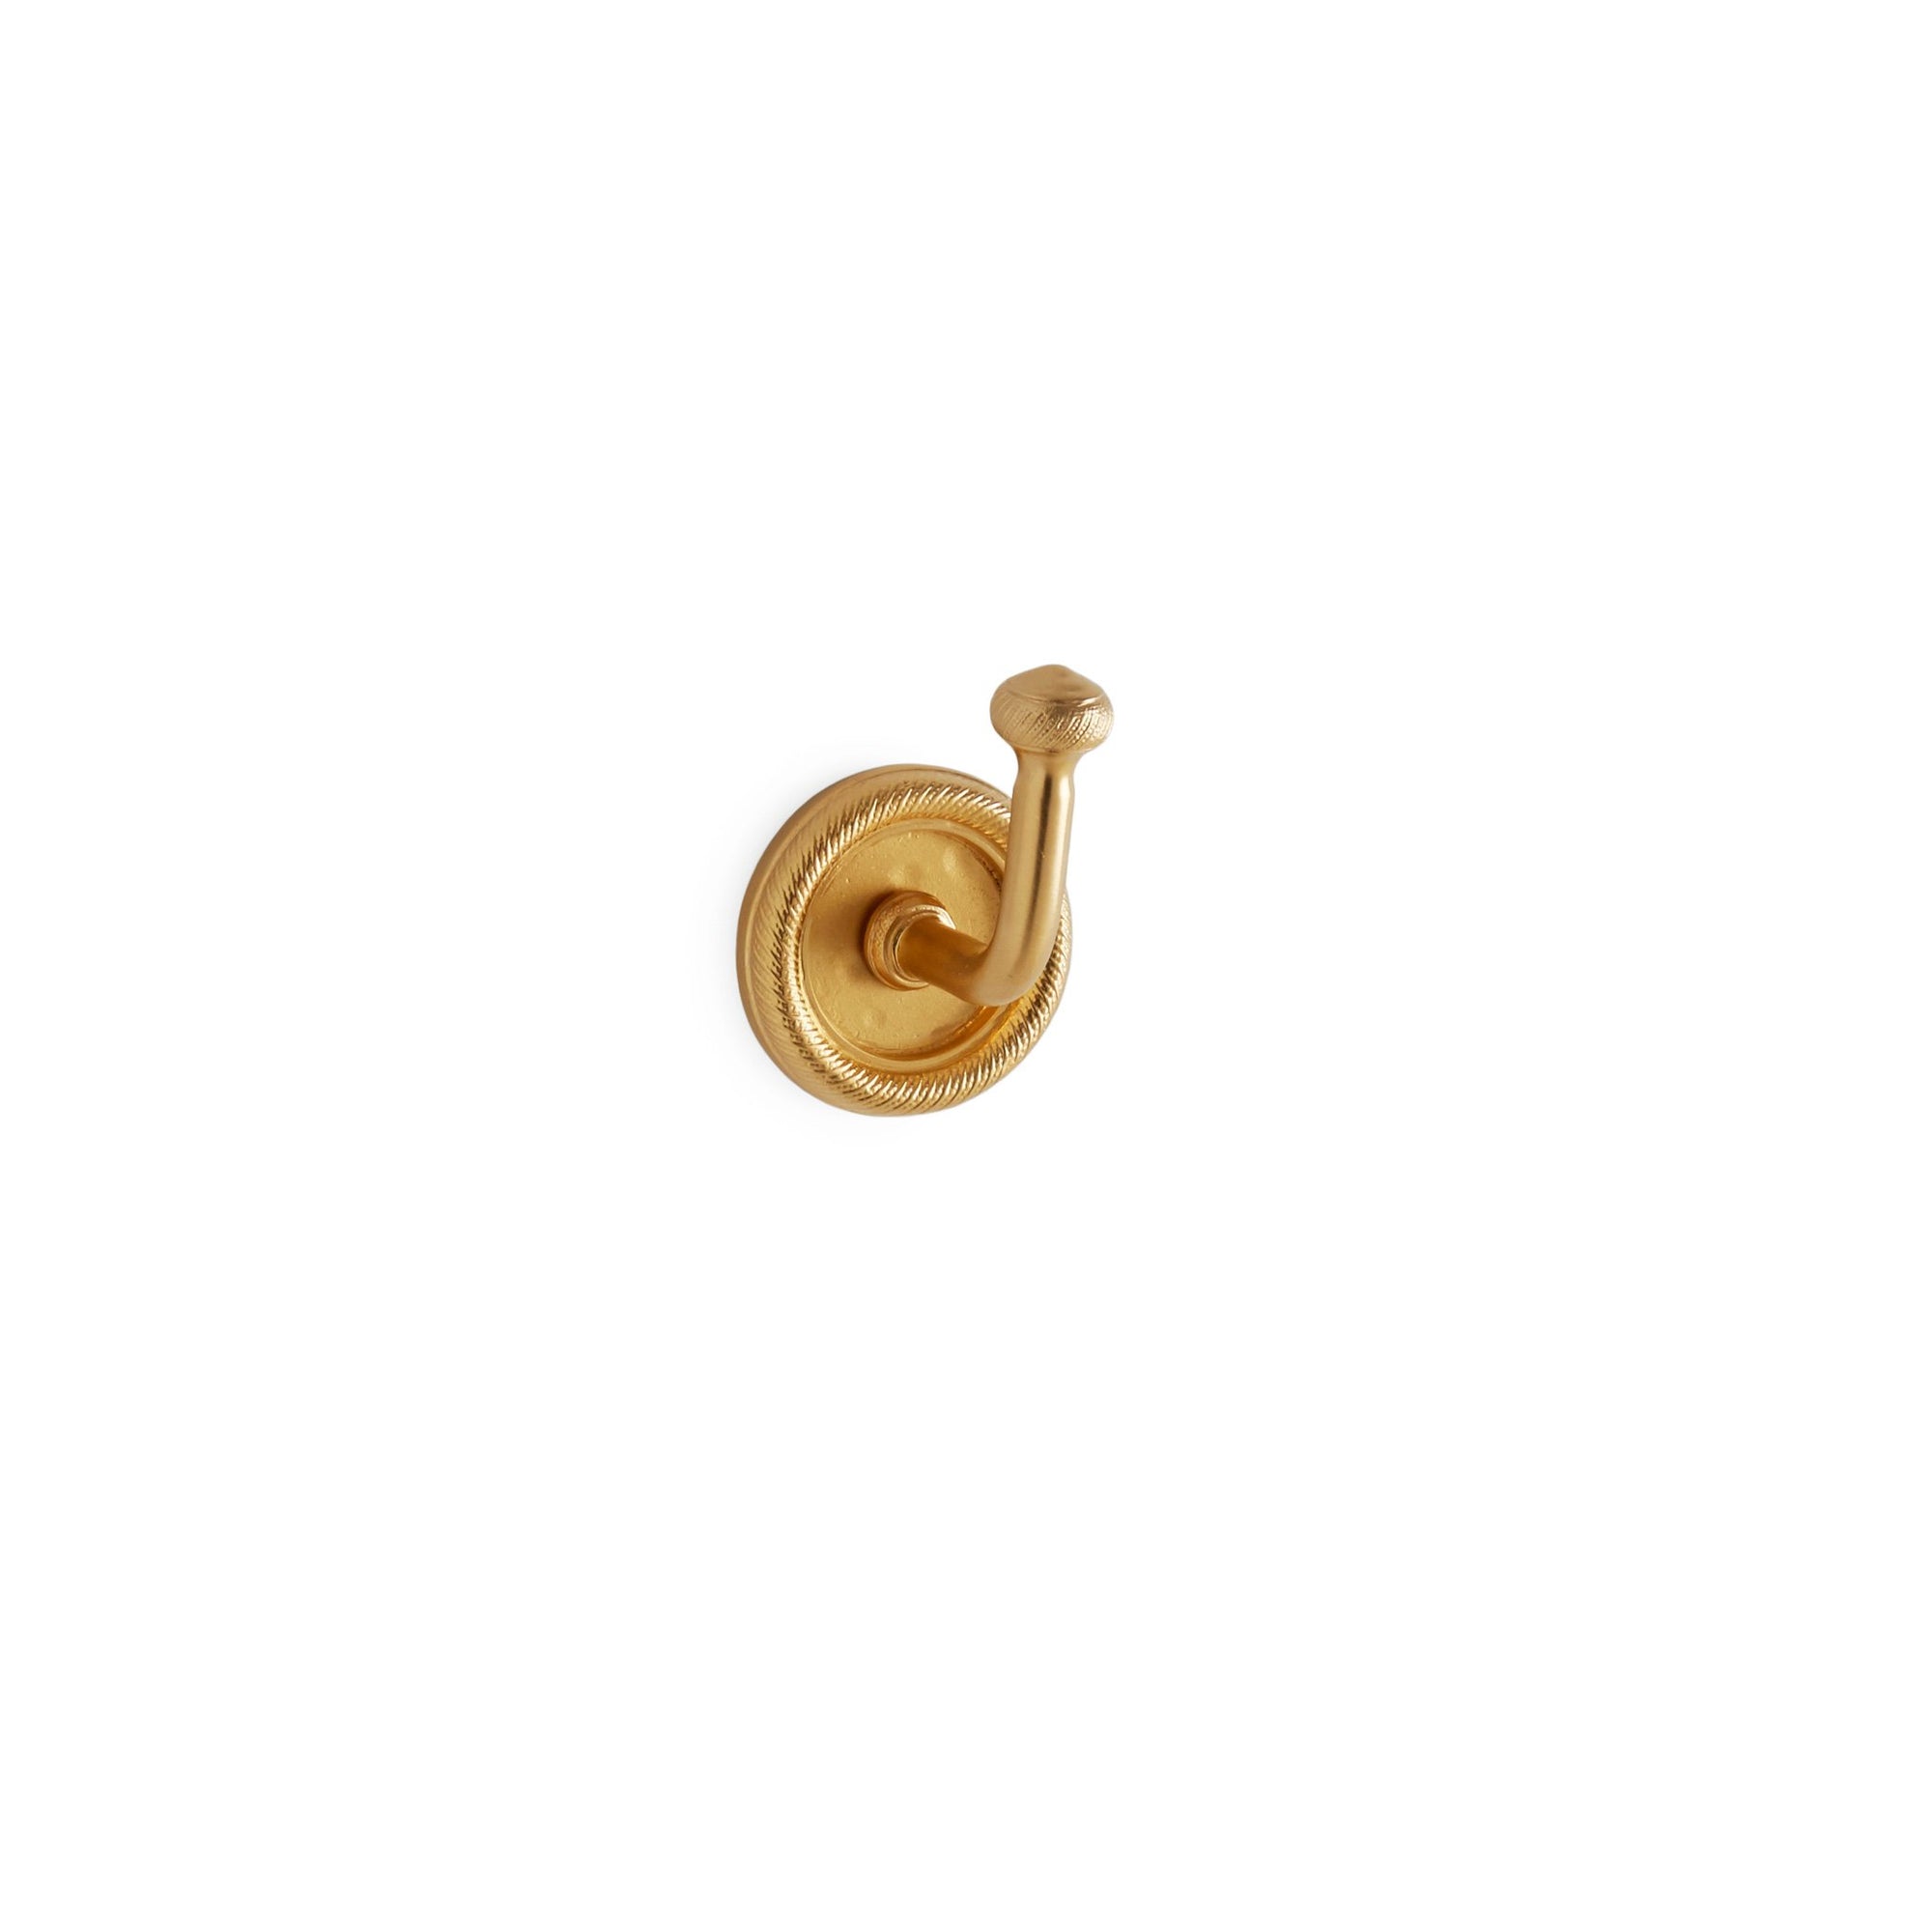 3437-GP Sherle Wagner International Classical Knurled Hook in Gold Plate metal finish